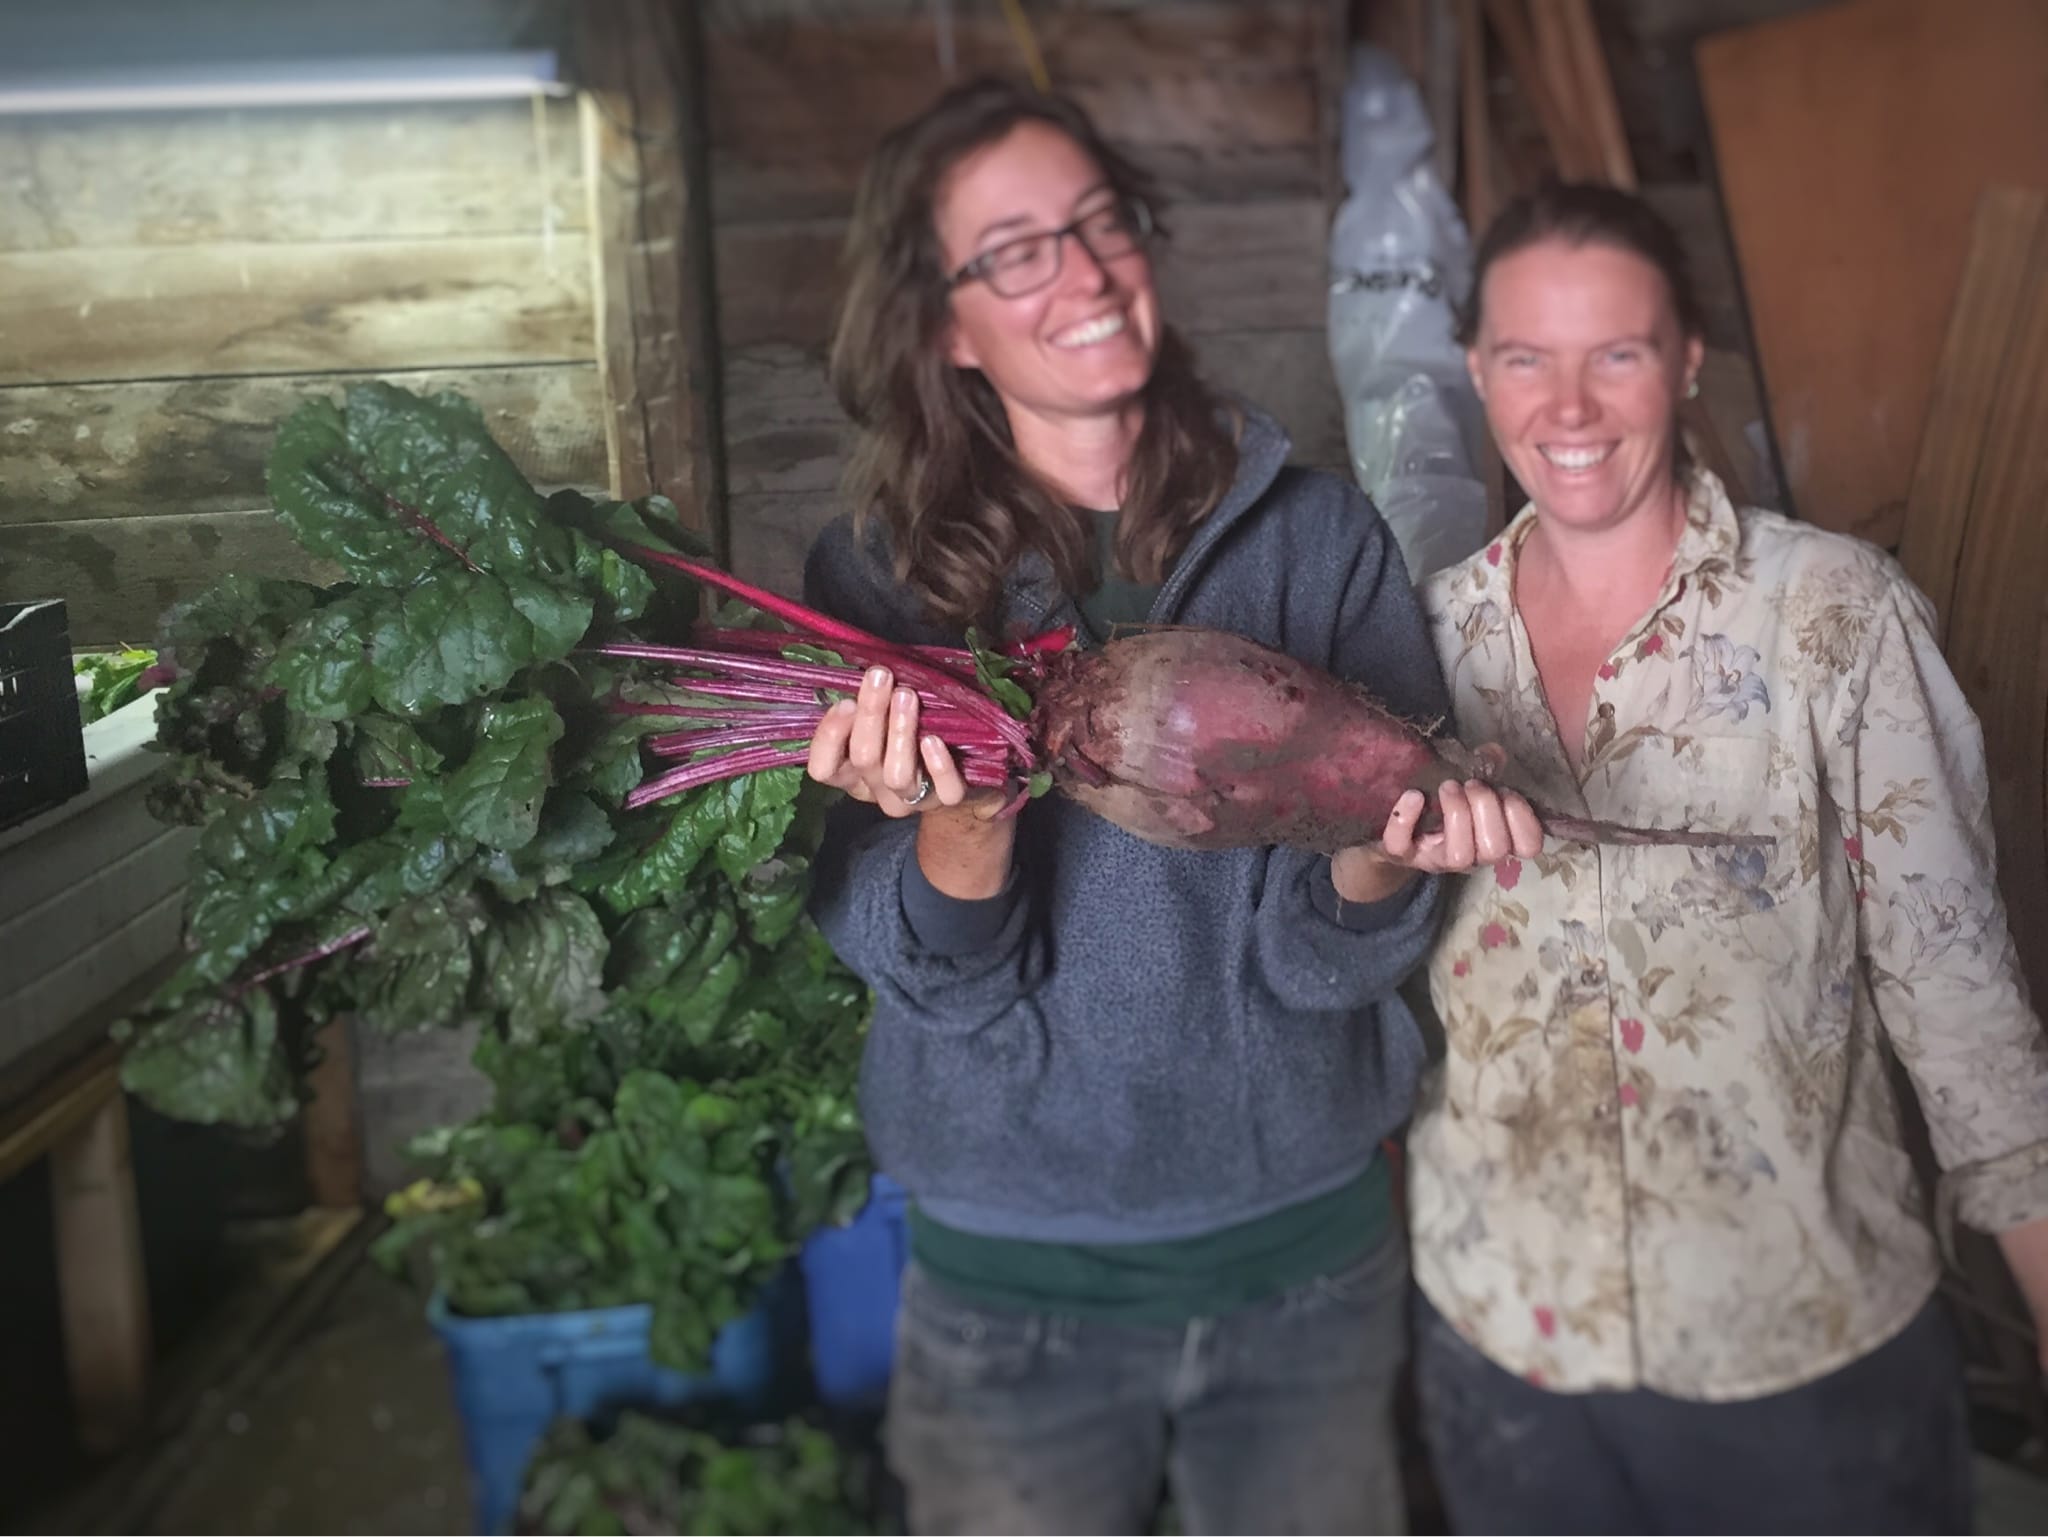 Kate, Jenny, & the Very Large Beet